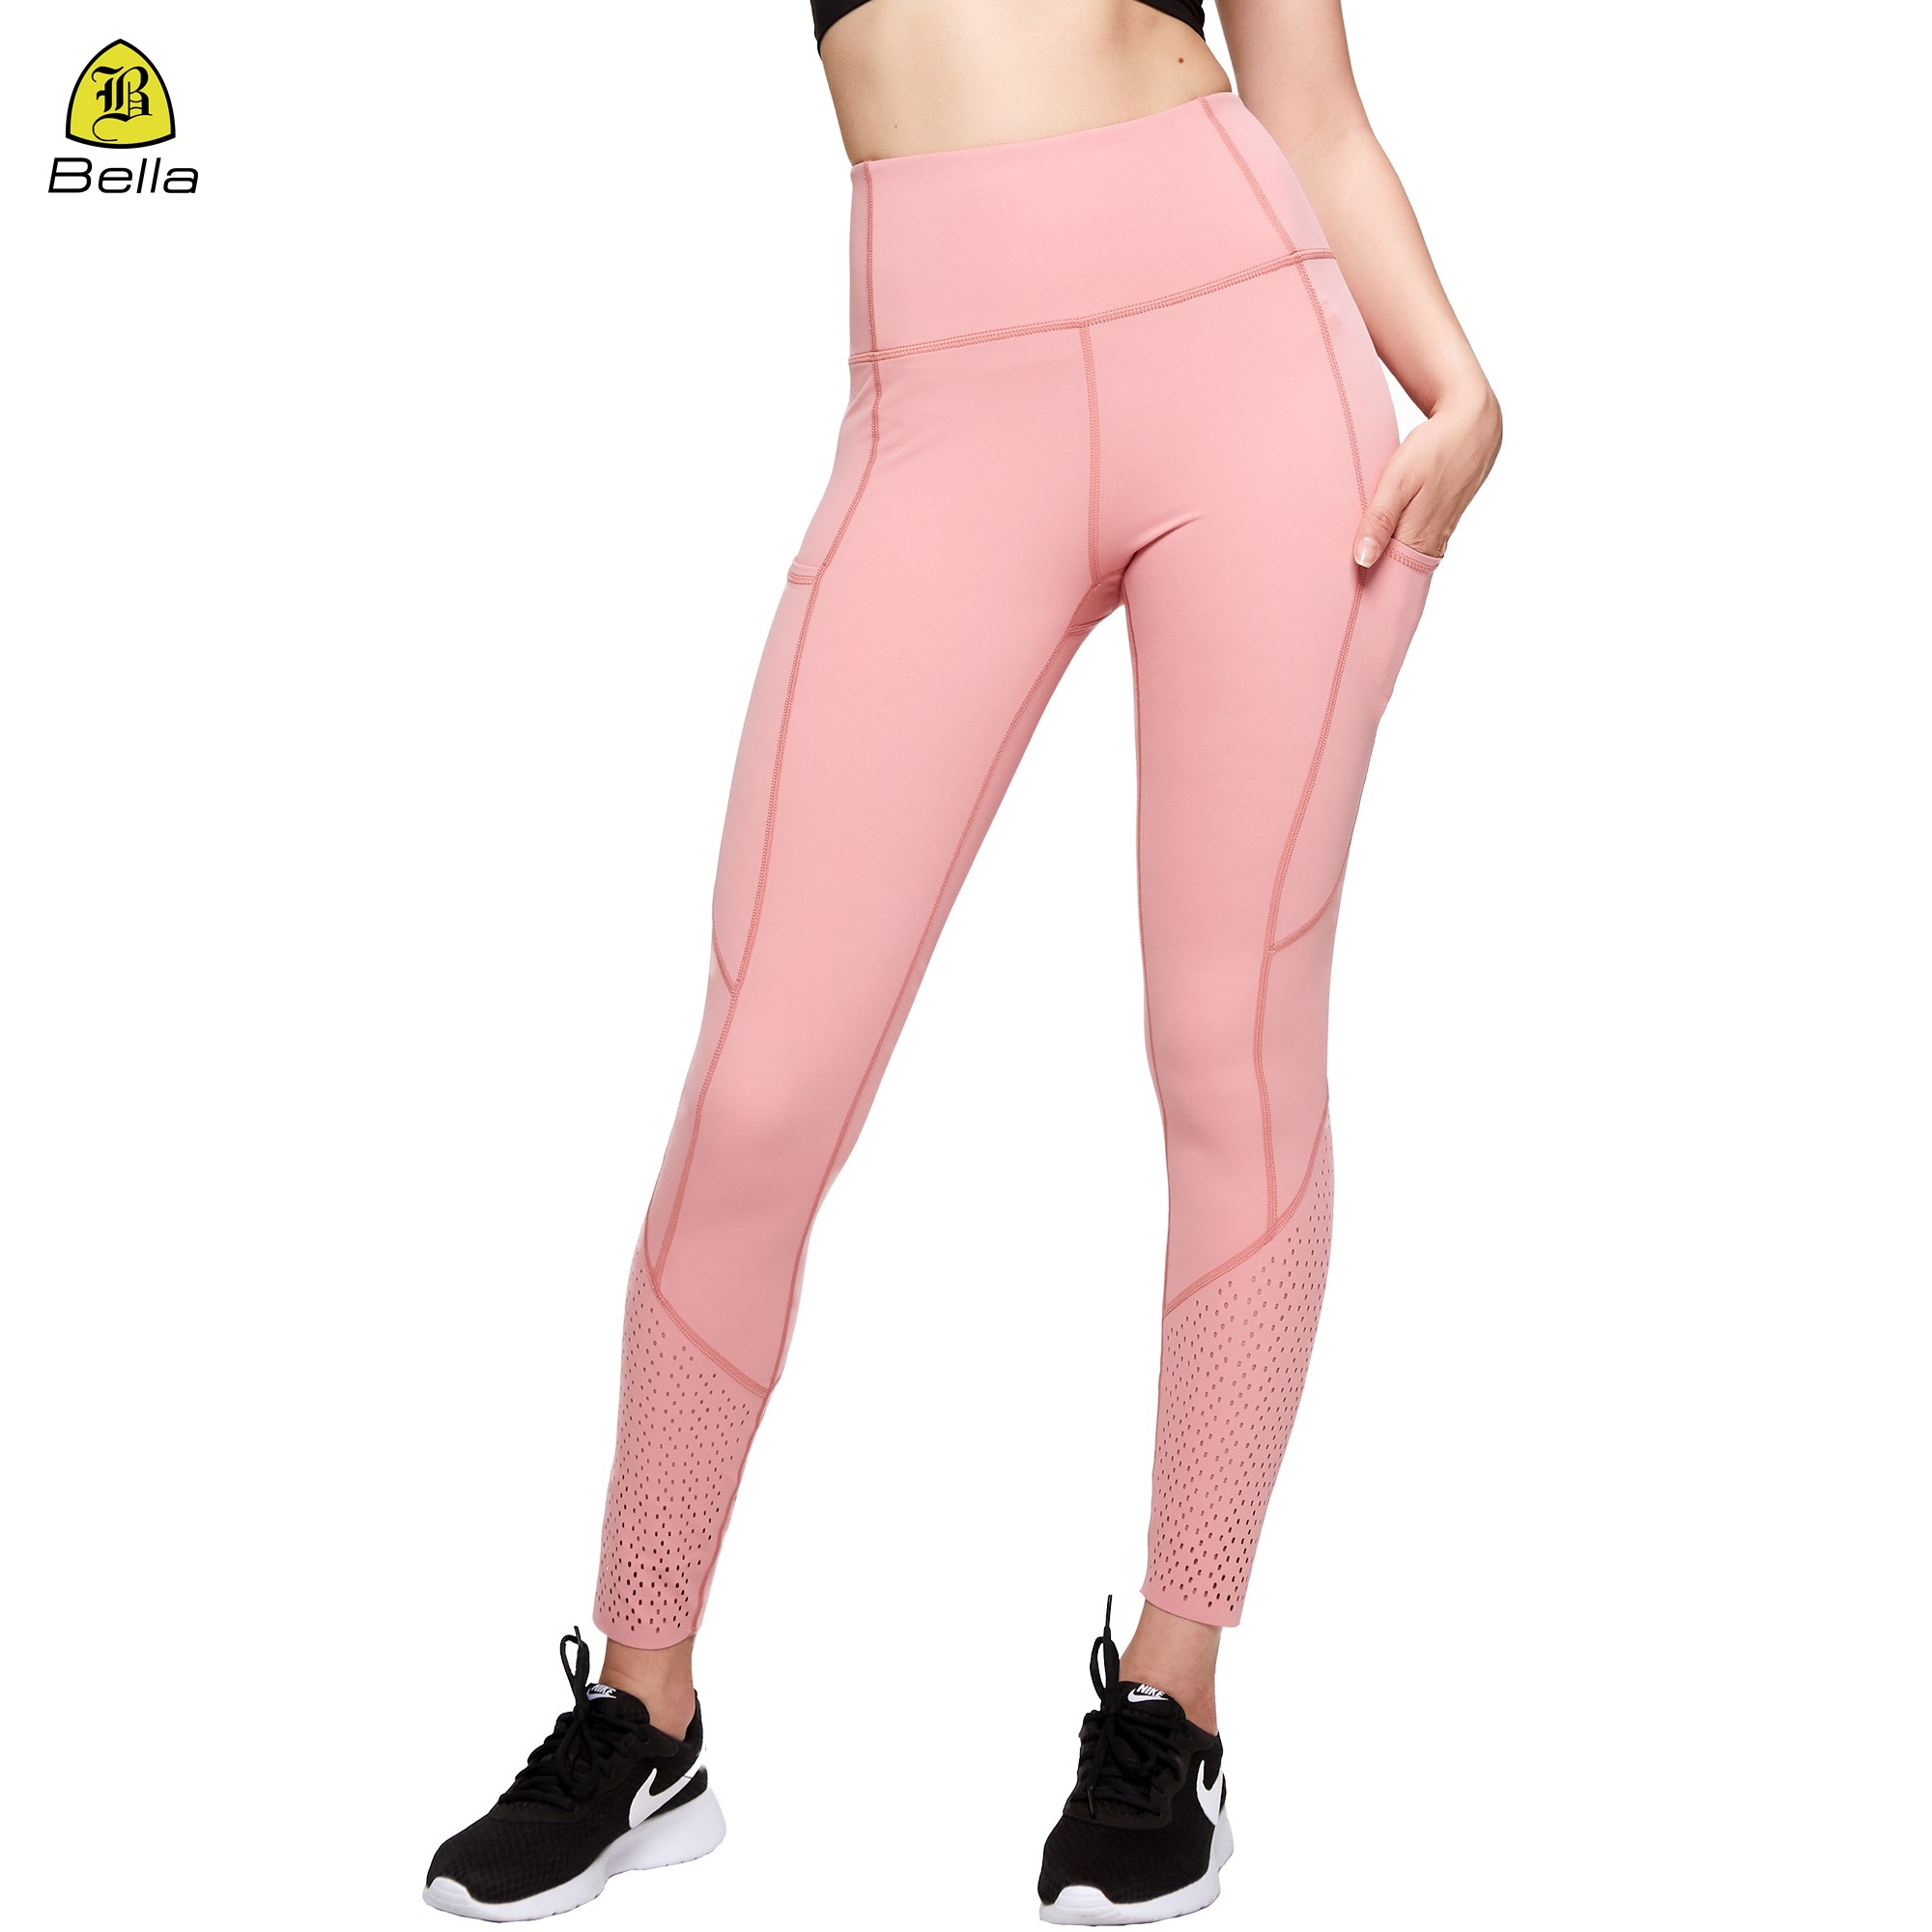 High Waist Tummy Control Workout Yoga Leggings With Side Pocket For Phone